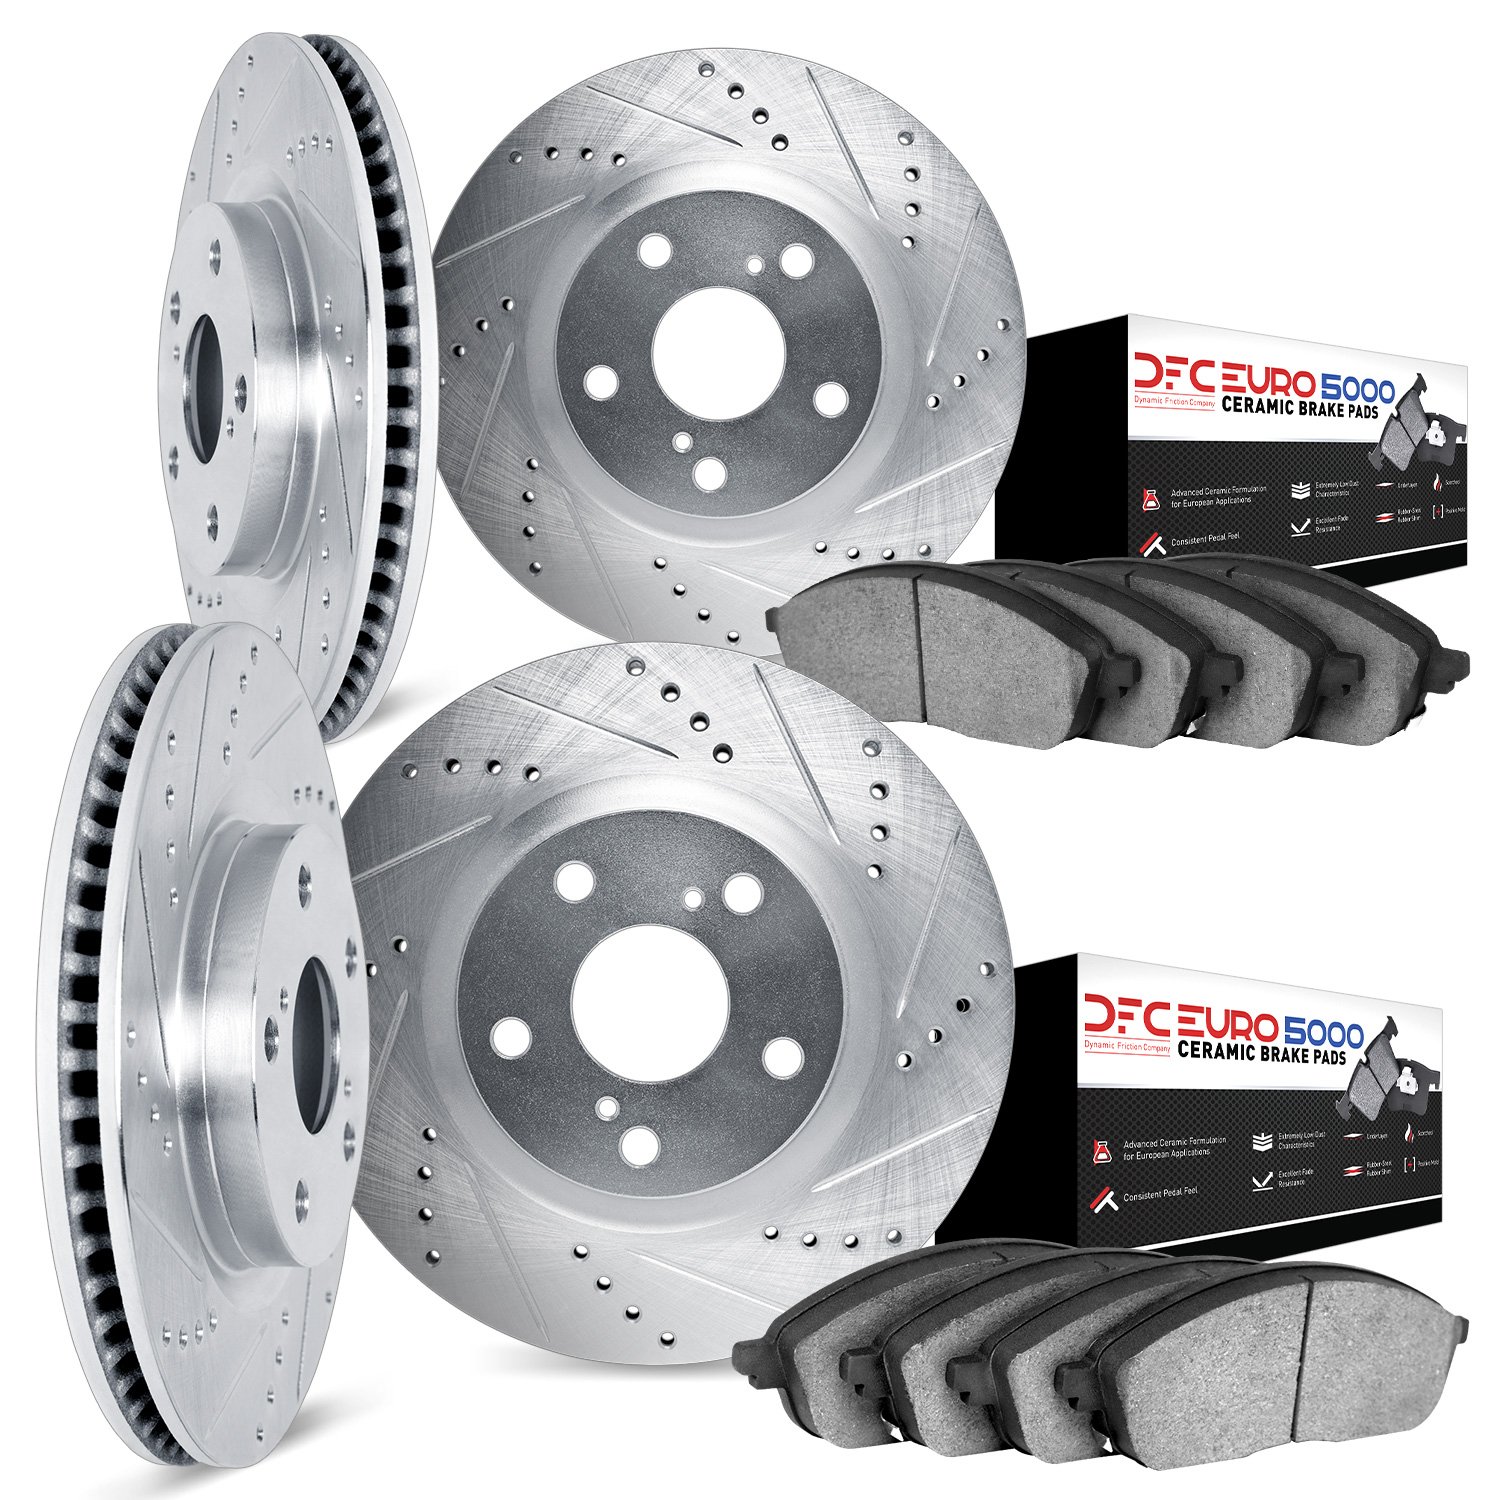 7604-31012 Drilled/Slotted Brake Rotors w/5000 Euro Ceramic Brake Pads Kit [Silver], 1995-2002 BMW, Position: Front and Rear